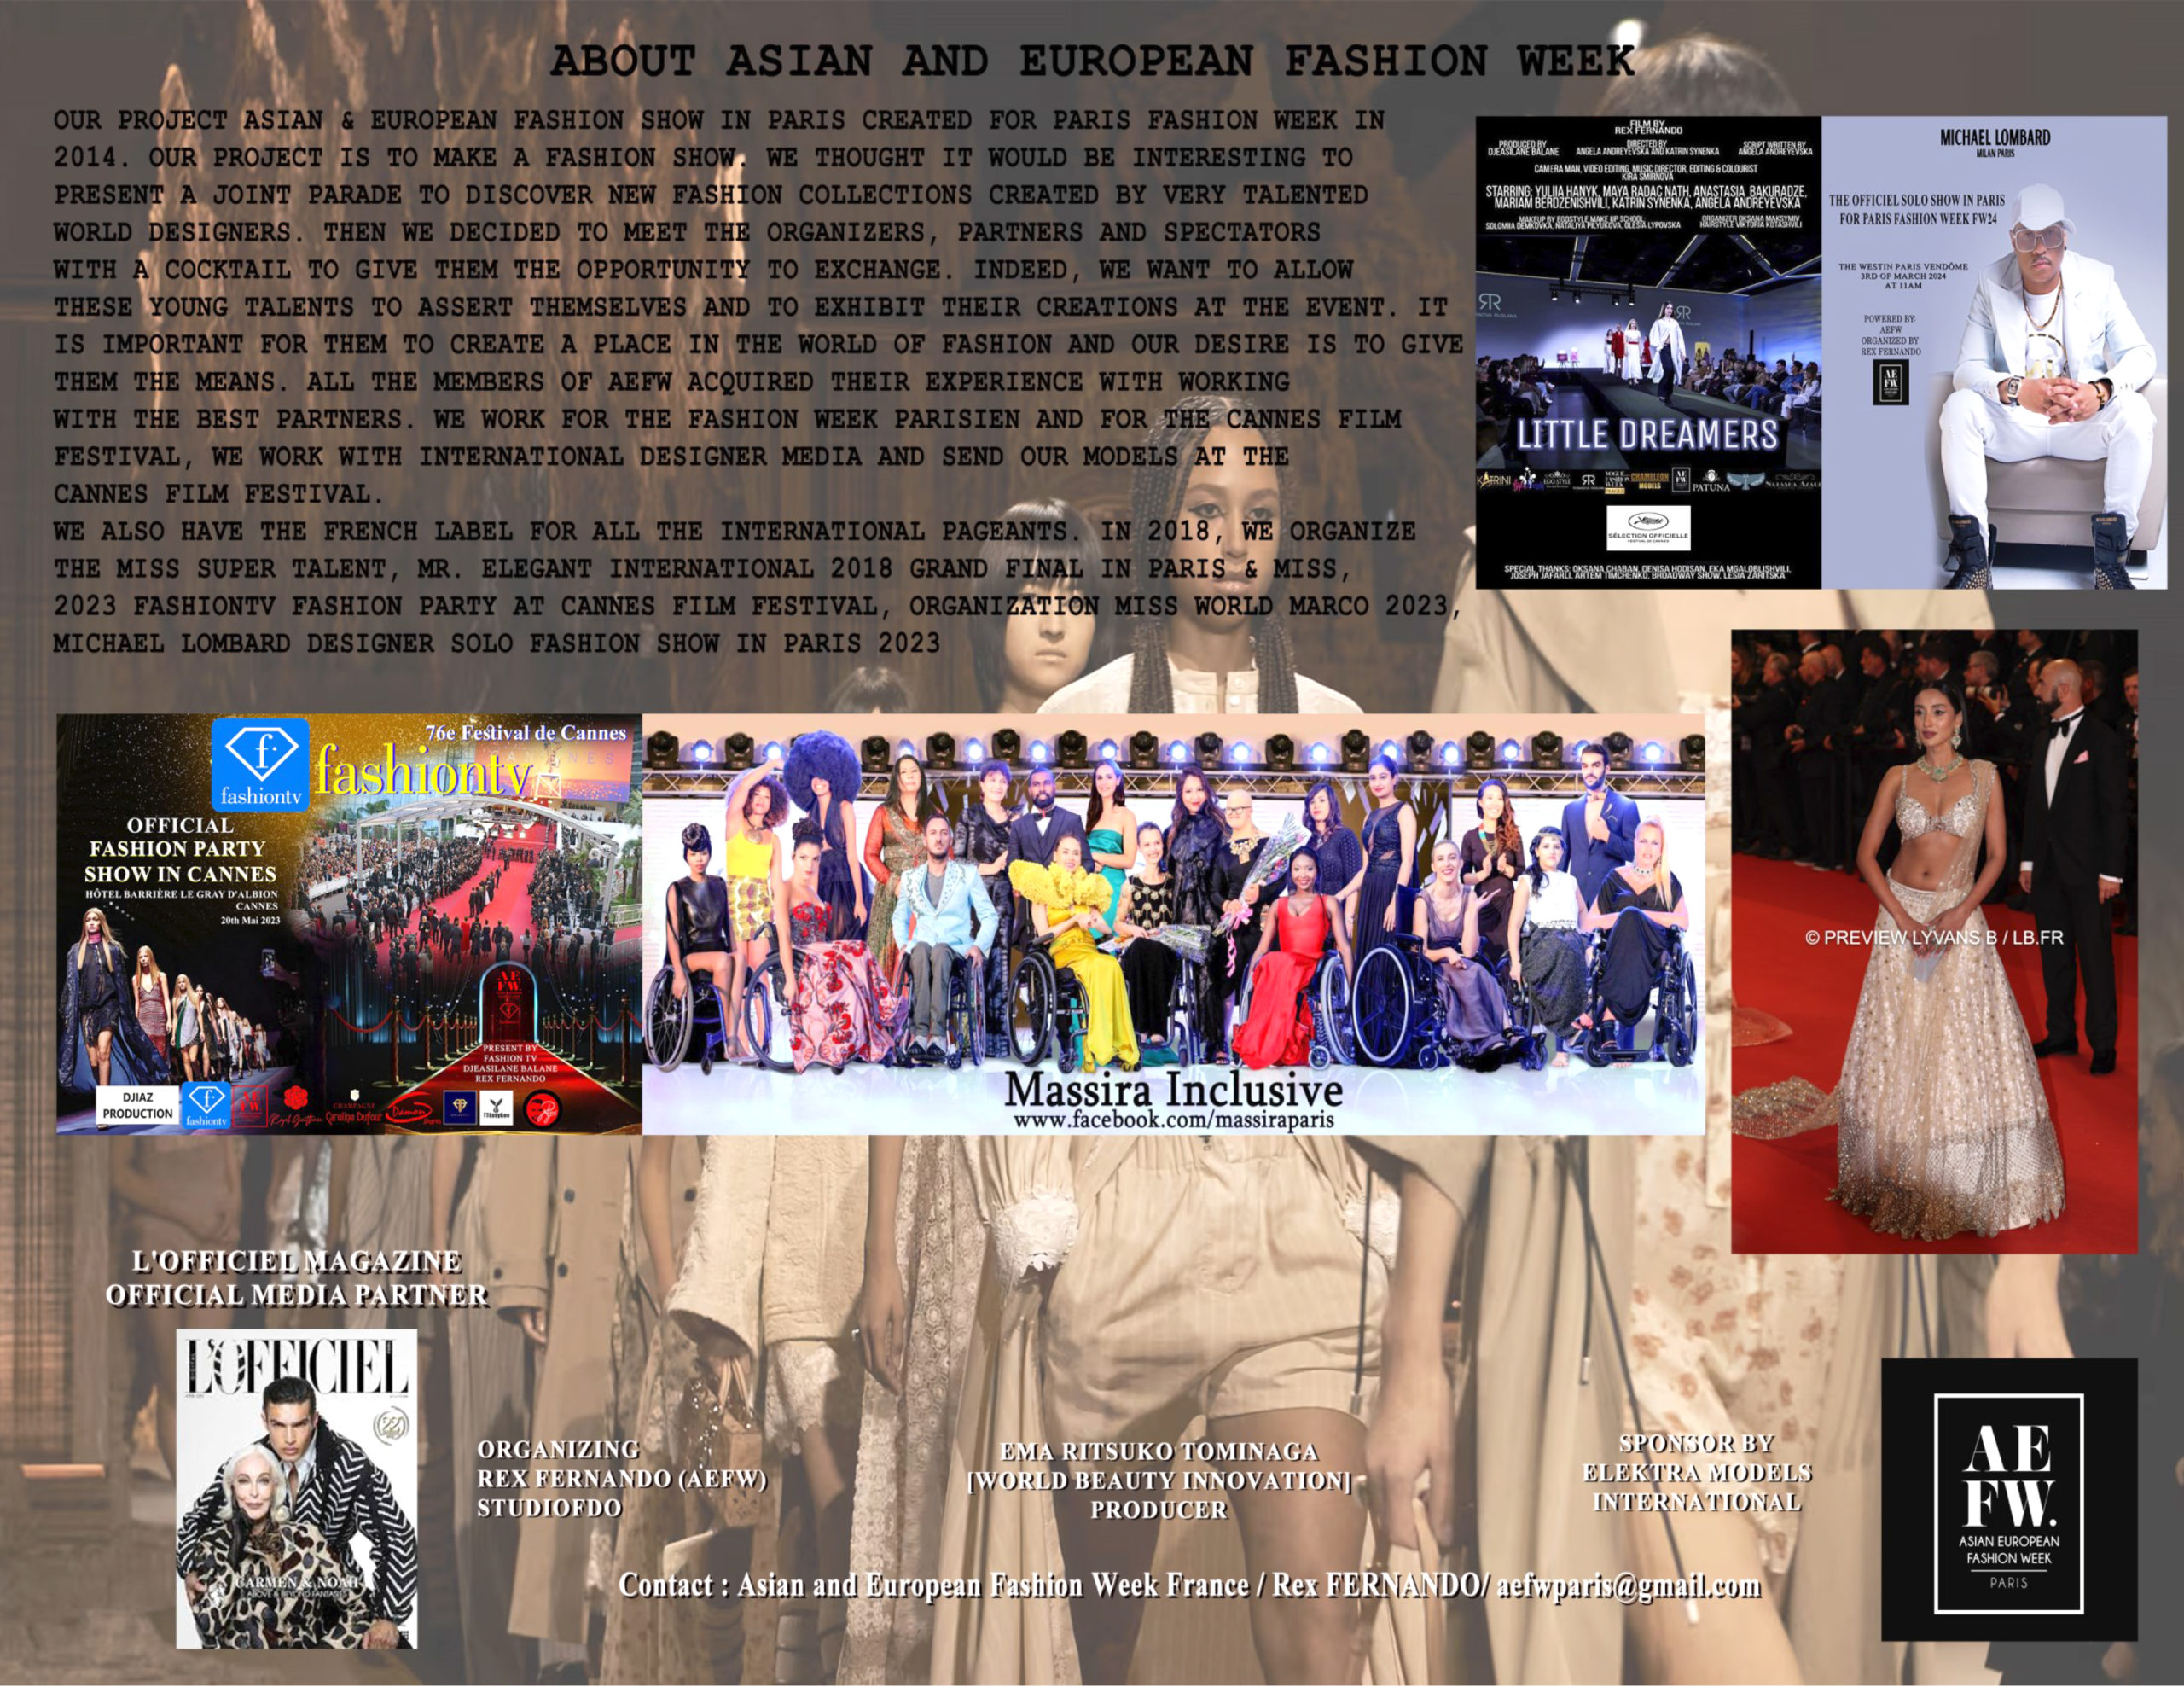 Experience-the-Pinnacle-of-Style-at-the-AEFW FW24(Asian-&-European-Fashion-Week)-in-Paris,-curated-by-the-Fashion-Maverick,-Rex-Fernando